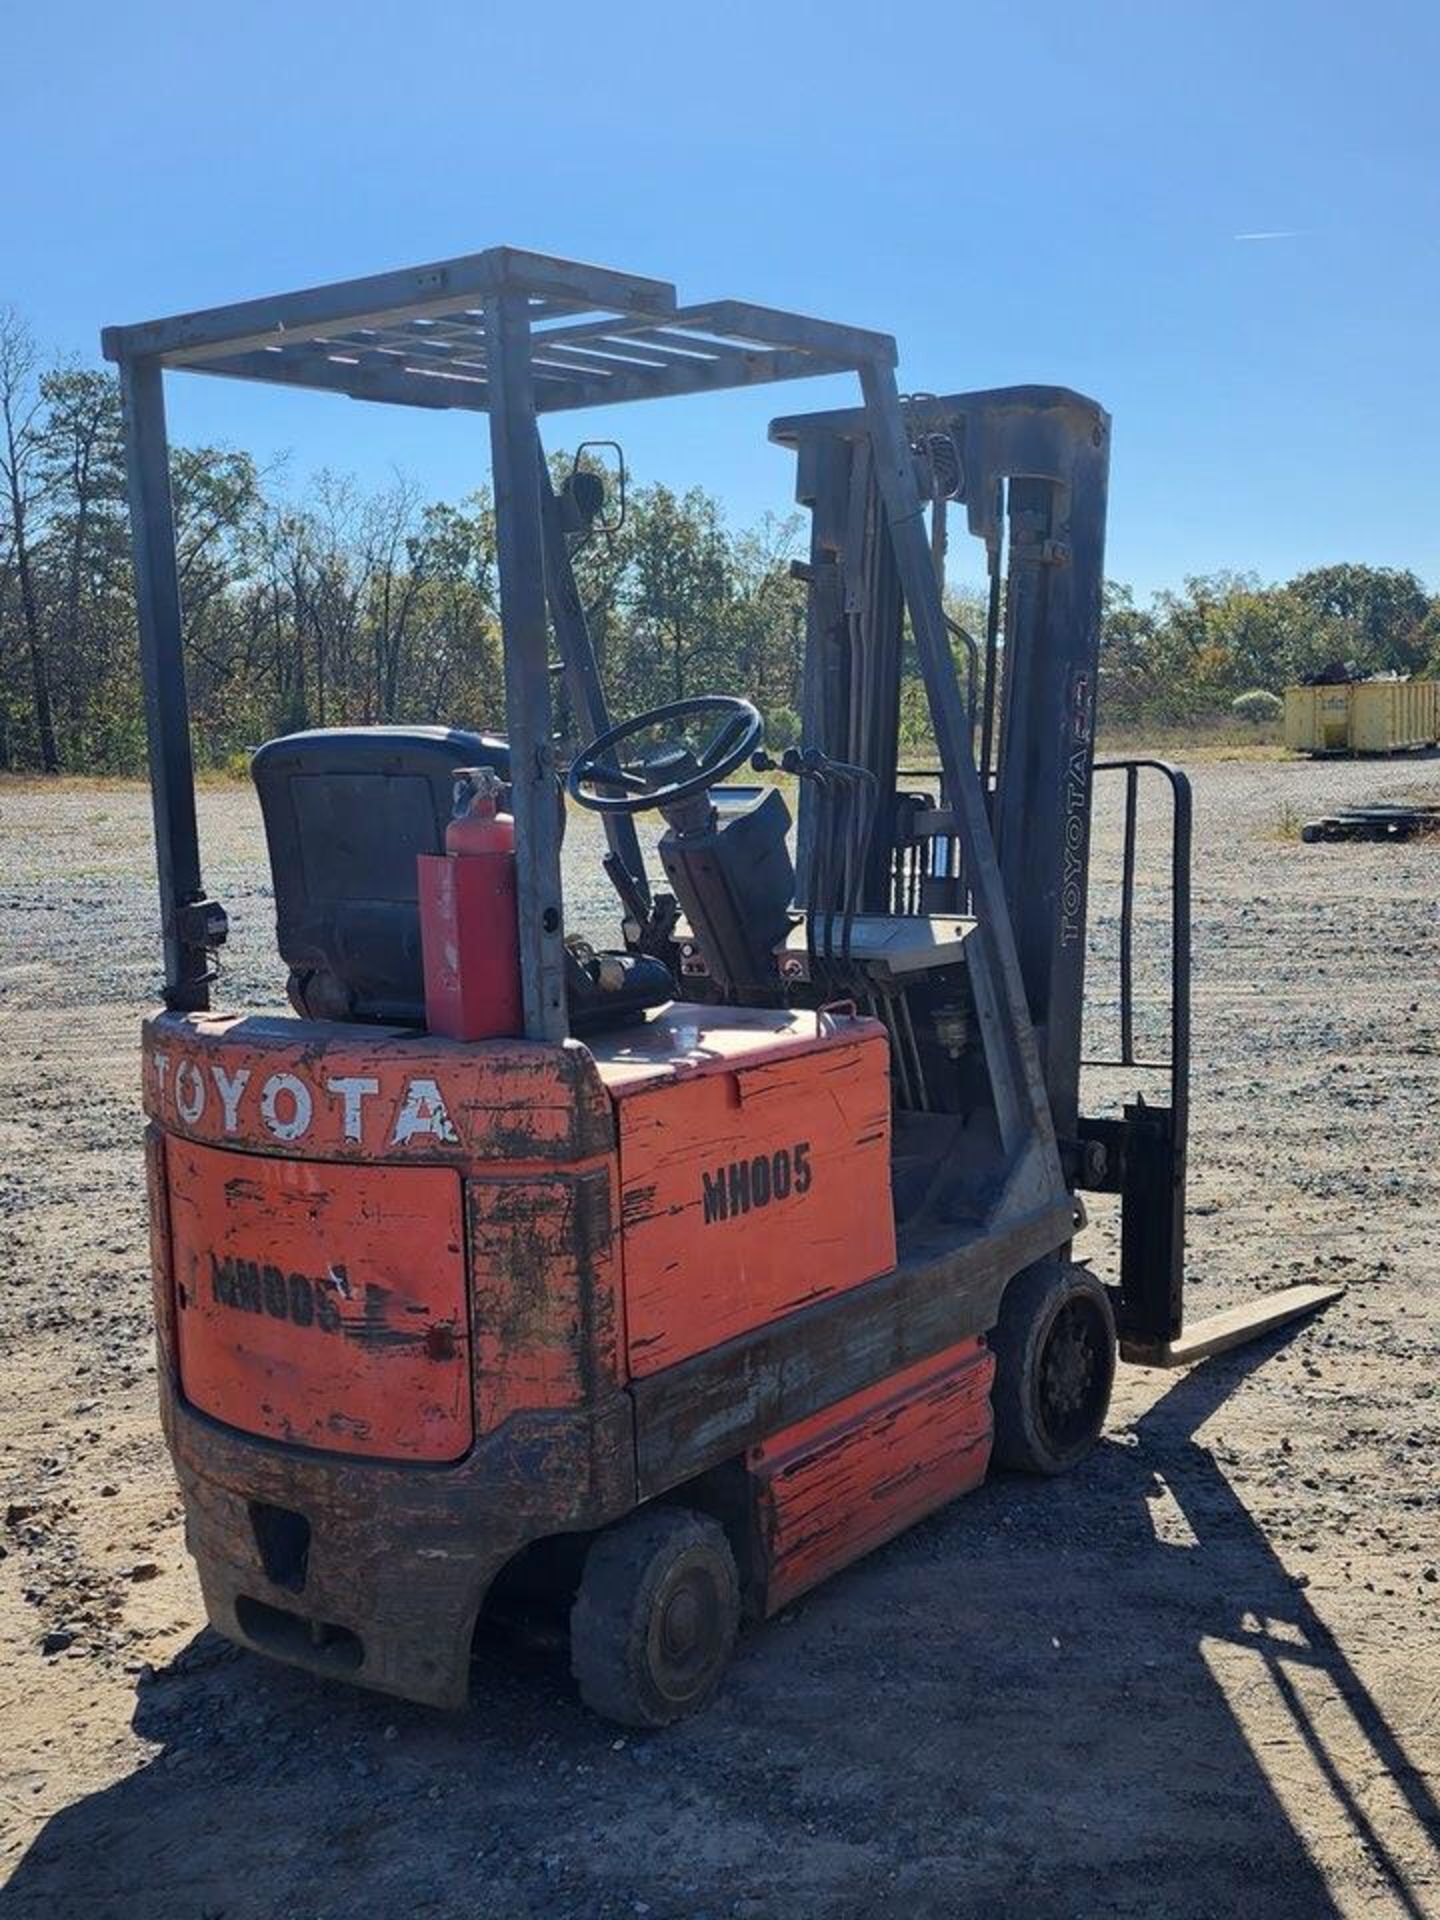 Toyota 30-5FBC15 Ele Forklift 3-Stage Mast; 185" Max Lift ht.; Hrs: 32,982.1; W/ Charger - Image 7 of 17